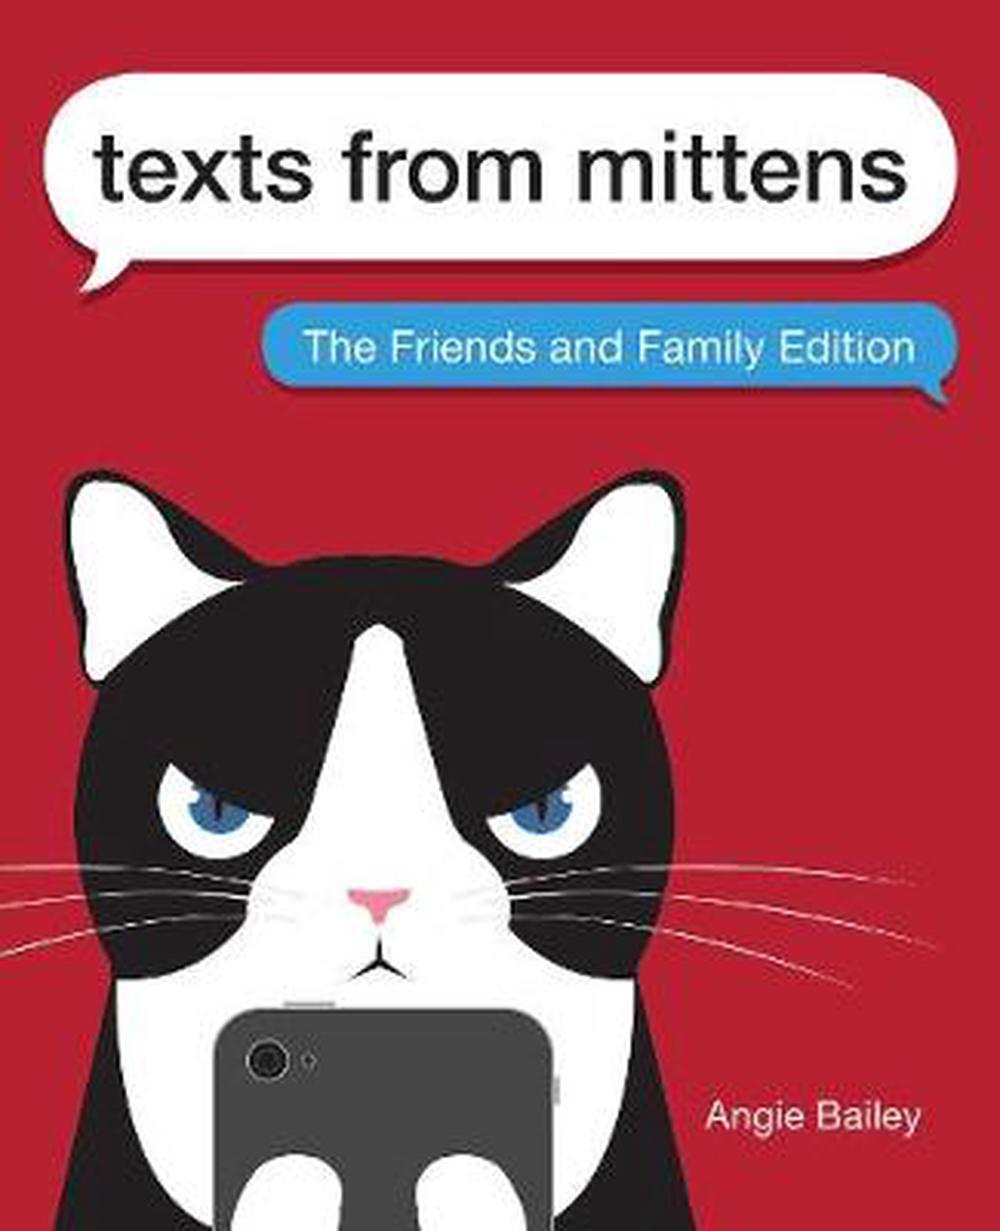 texts-from-mittens-the-friends-and-family-edition-by-angie-bailey-english-pap-9781524851729